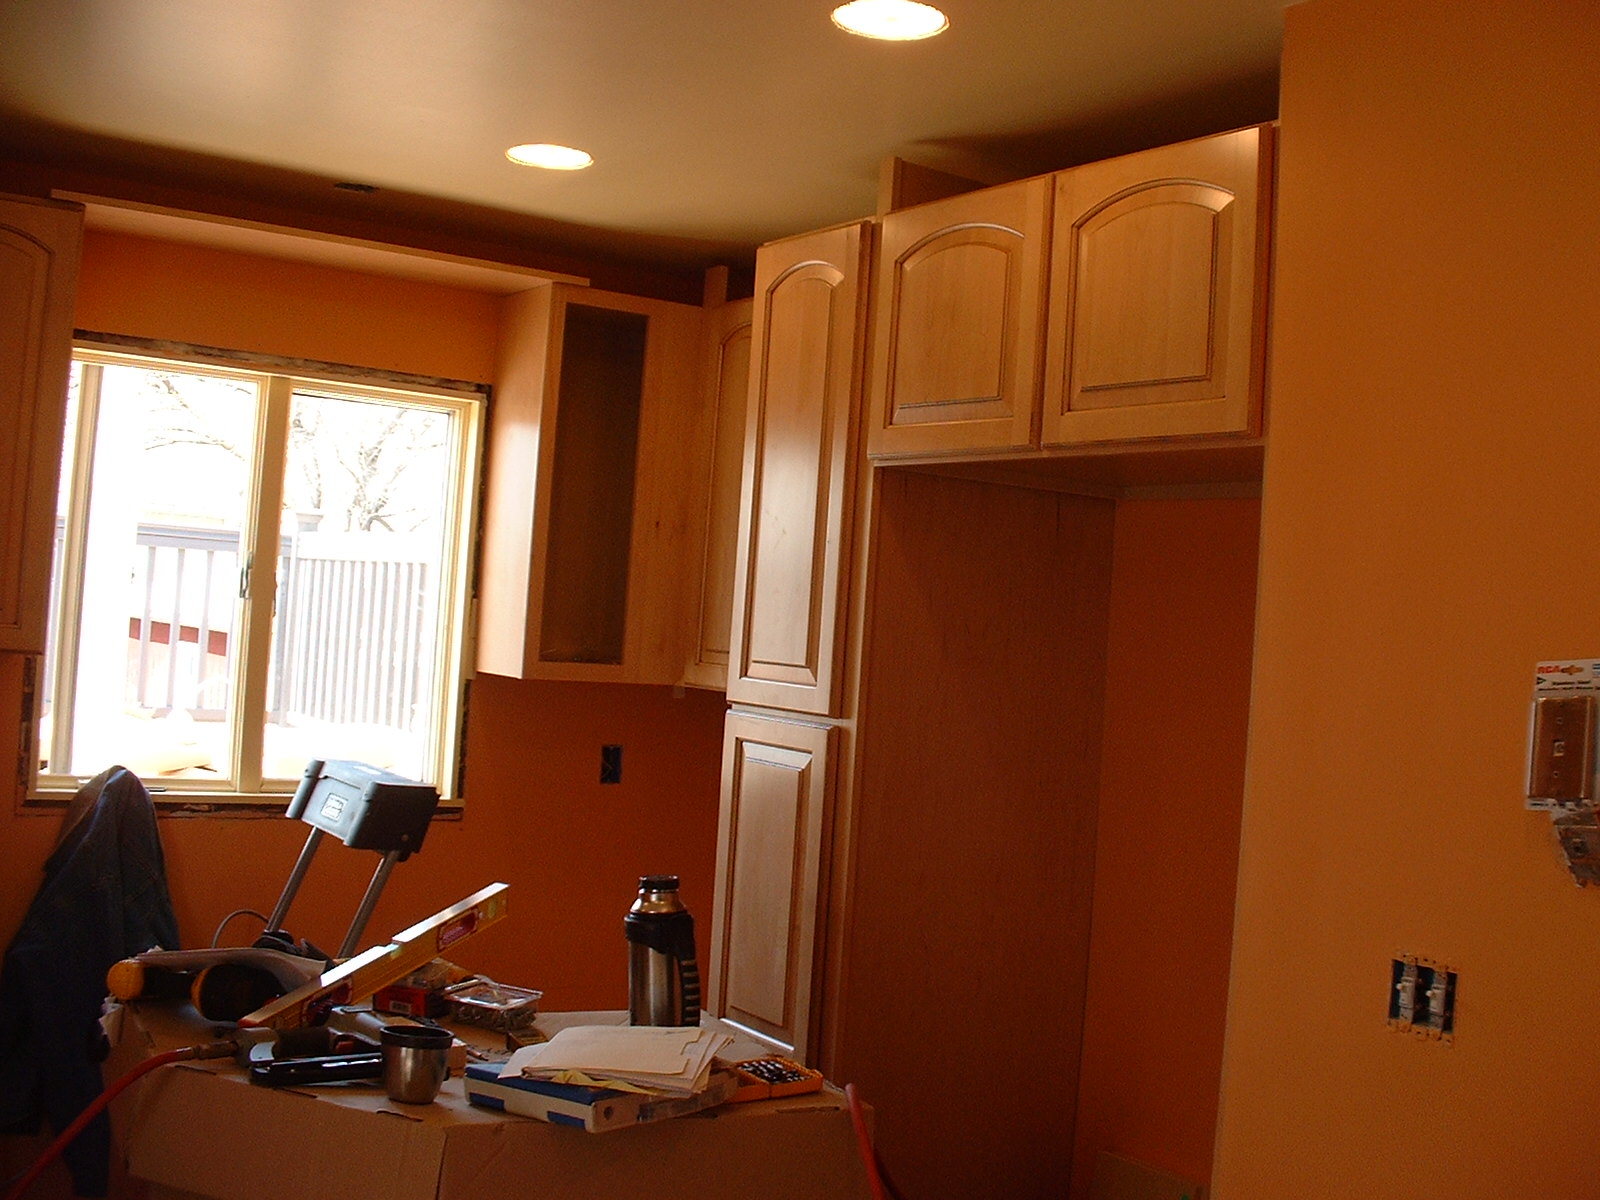 The upper cabinets are almost finished, and the doors are on.